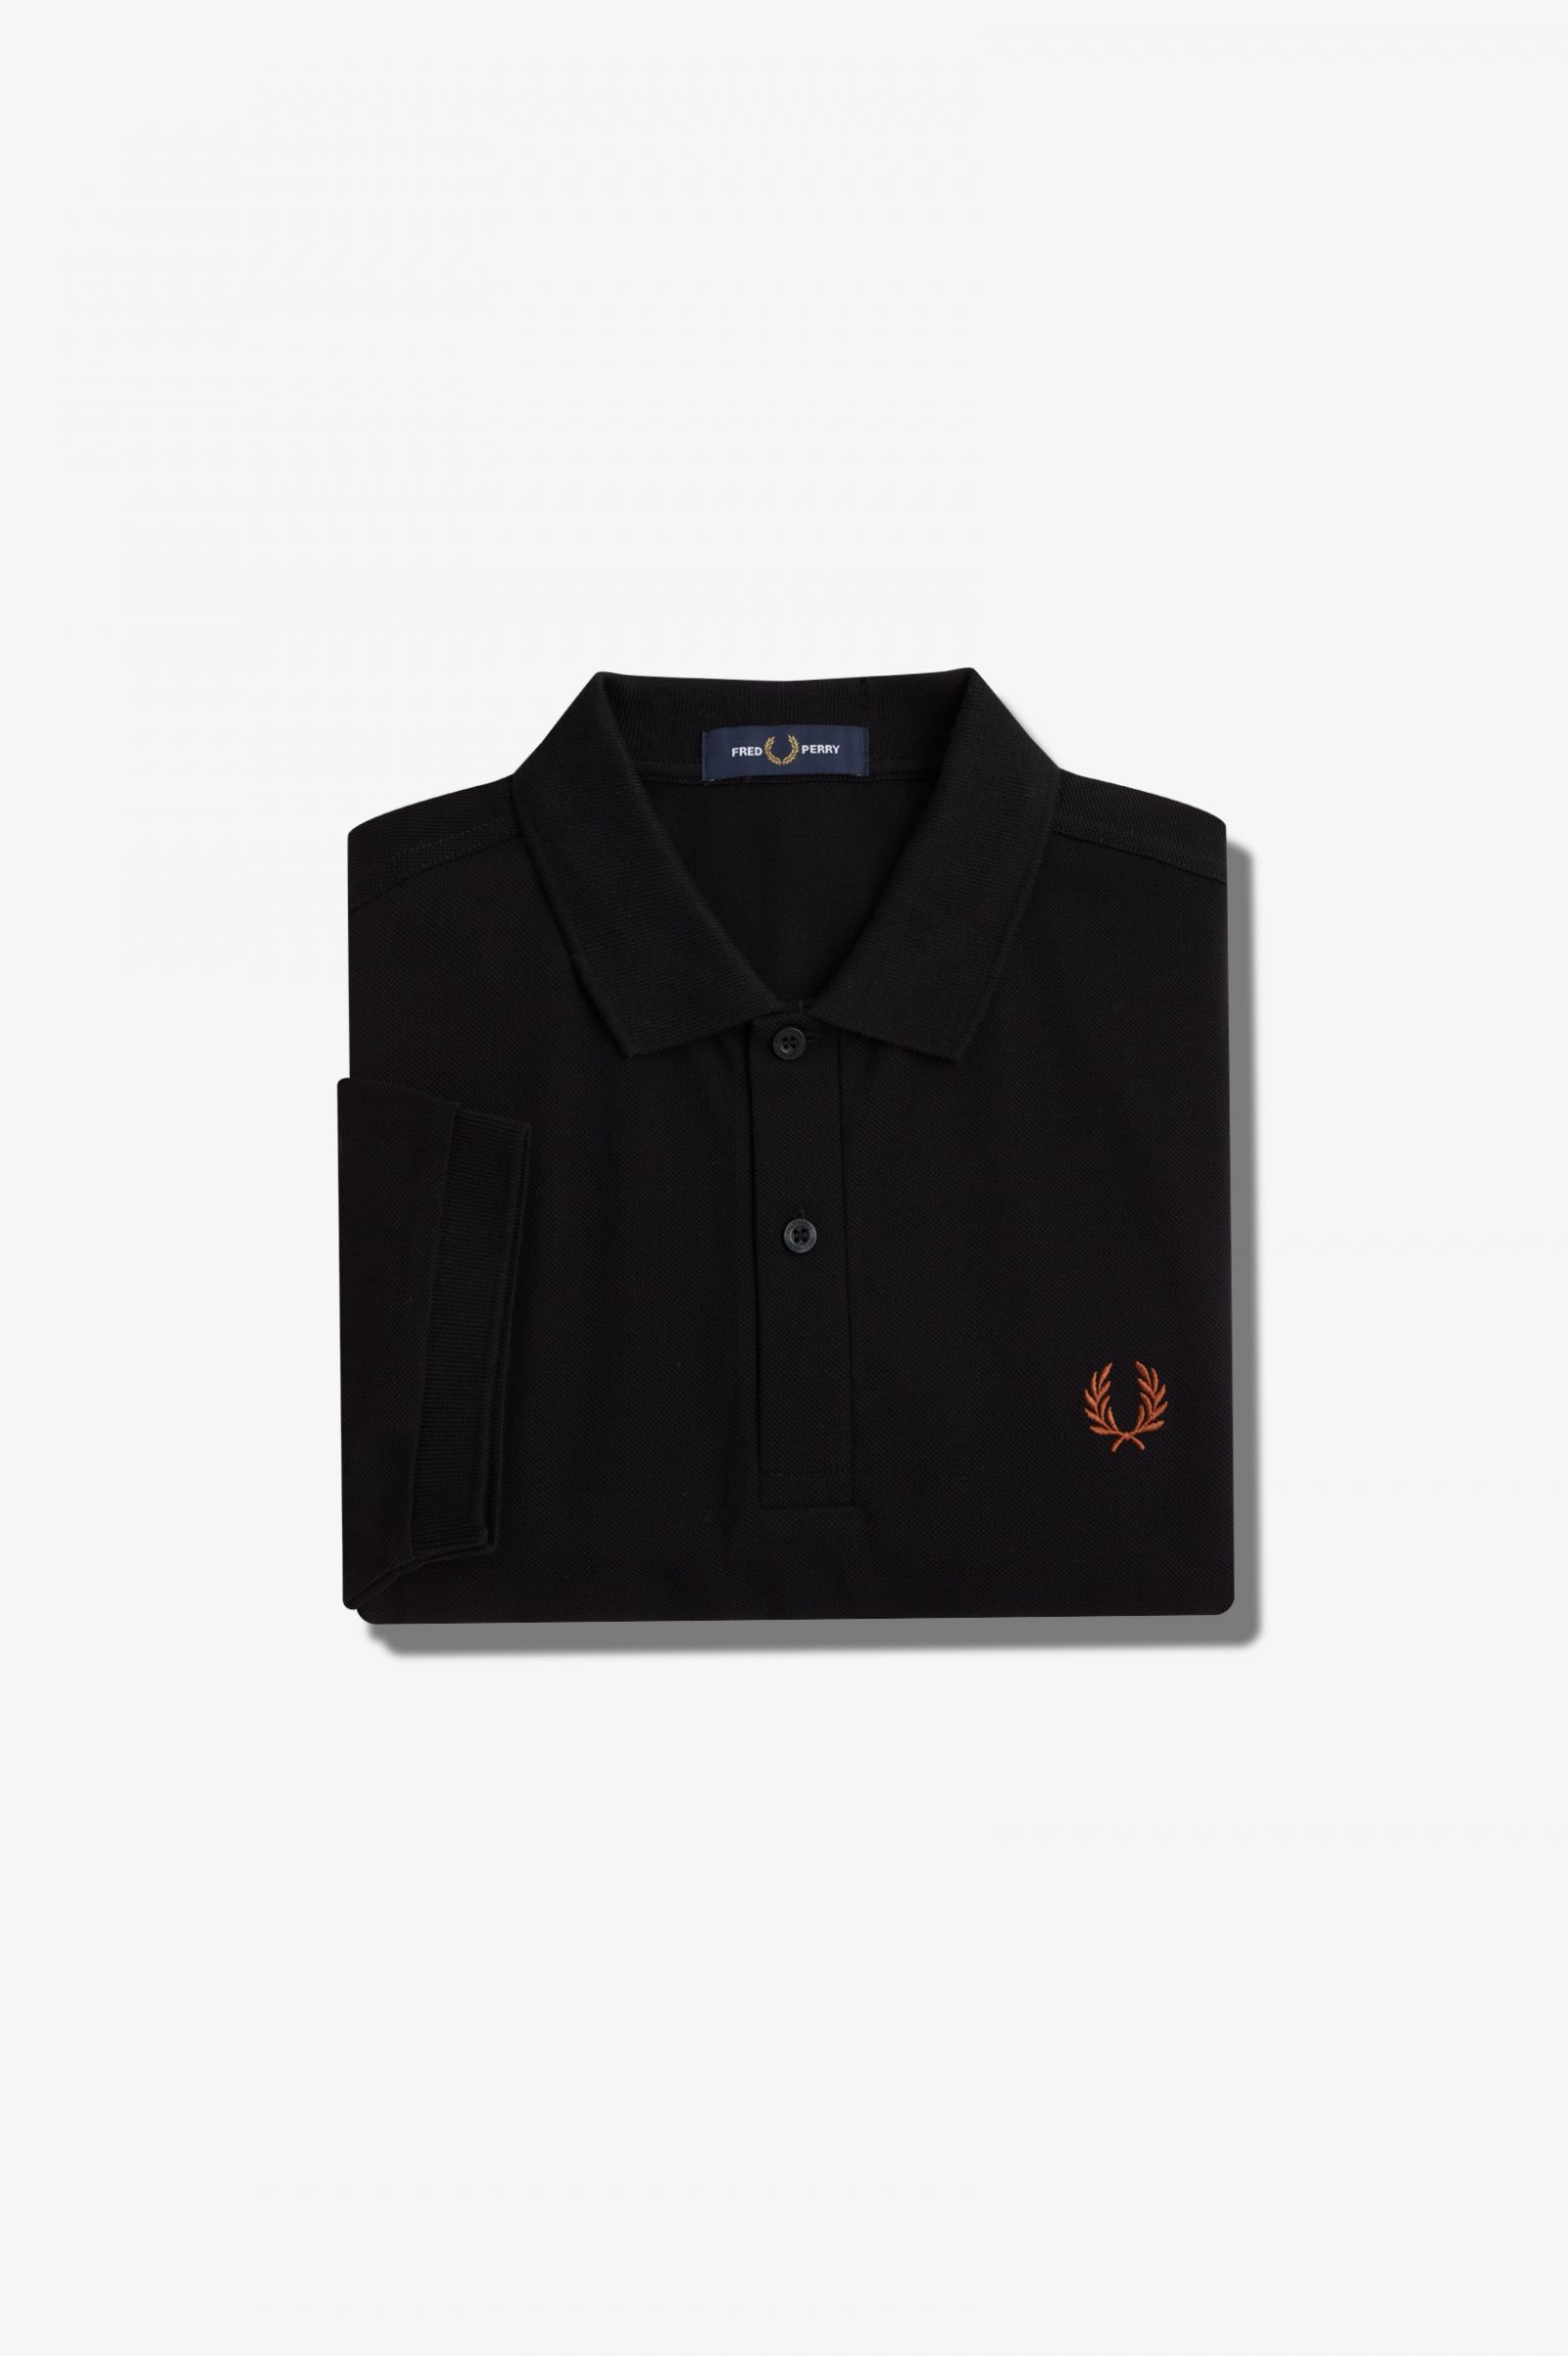 M6000 - Black / Whisky Brown | The Fred Perry Shirt | Men's Short ...